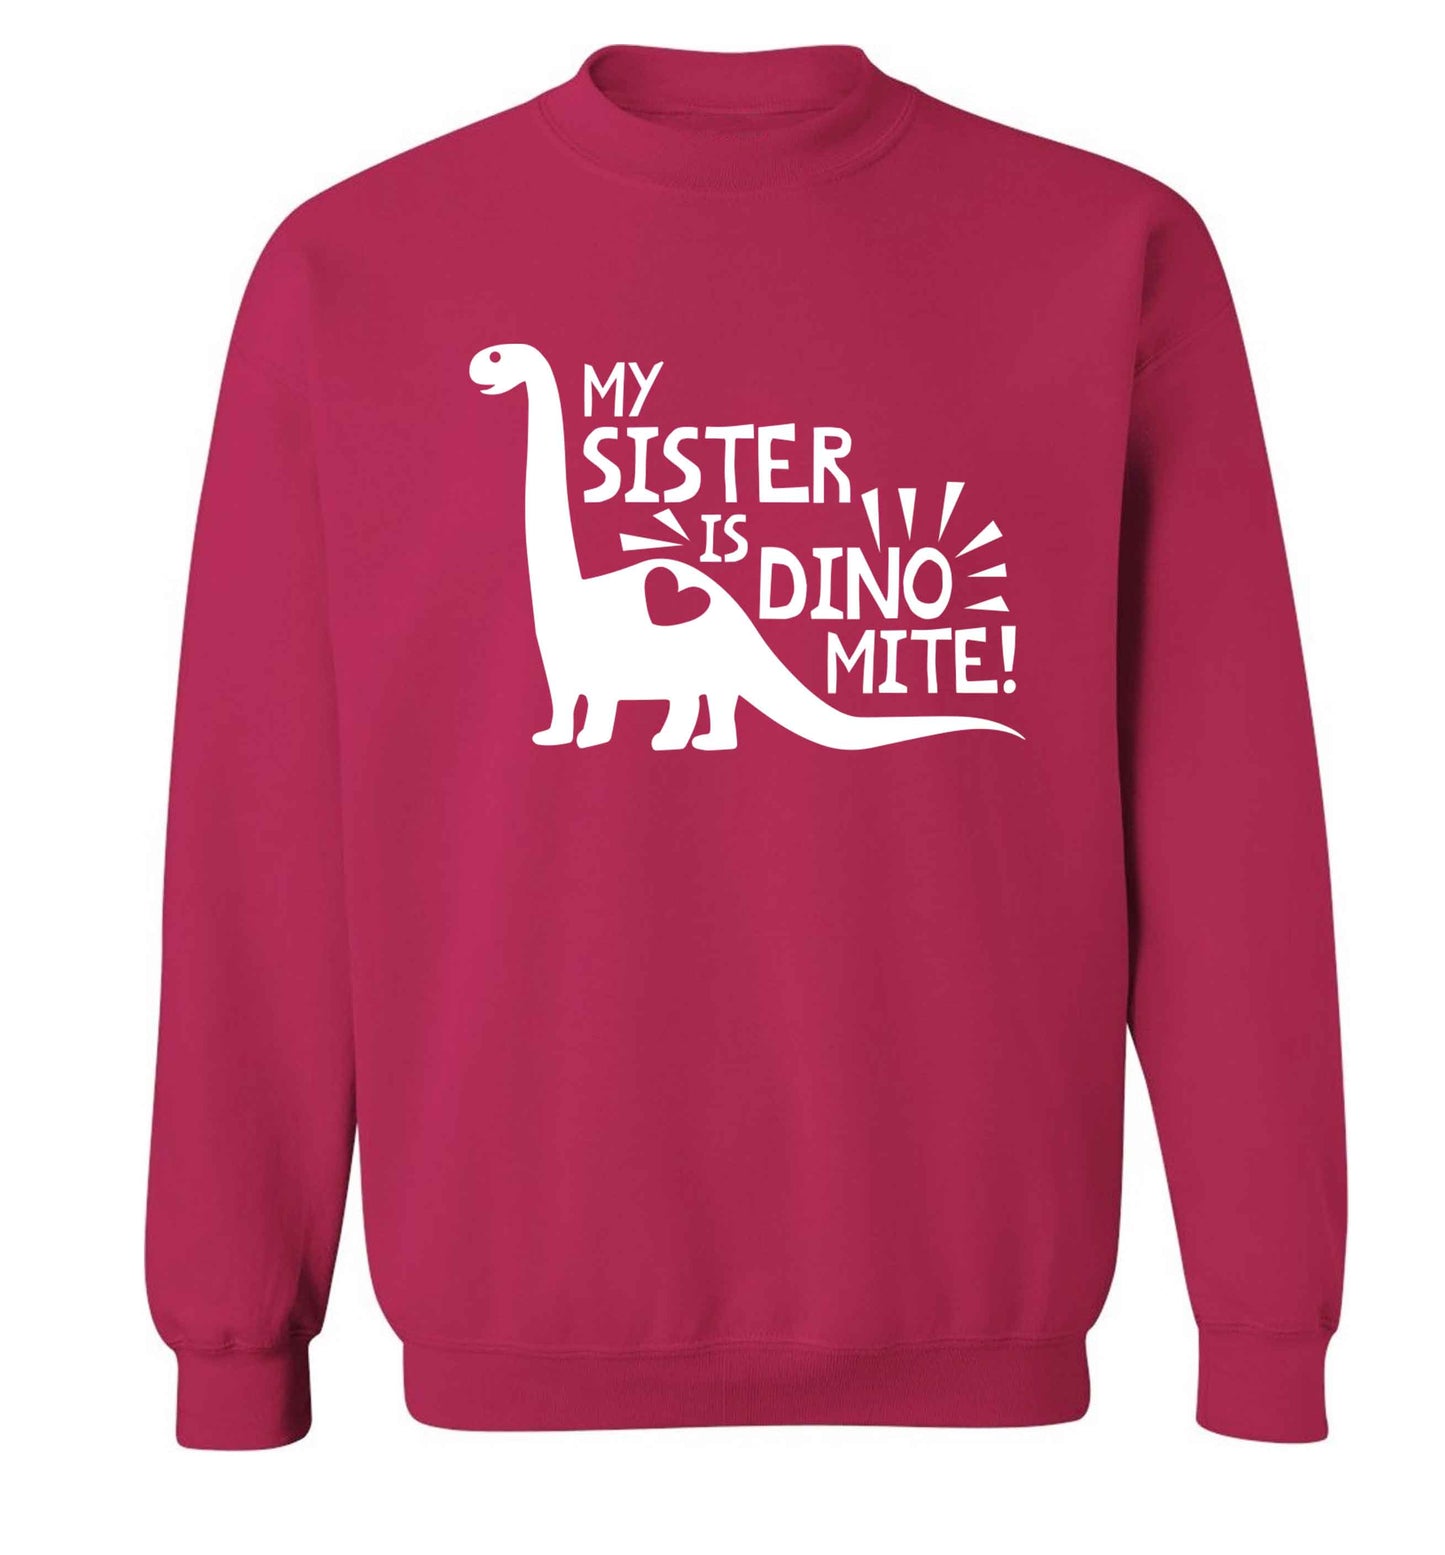 My sister is dinomite! Adult's unisex pink Sweater 2XL